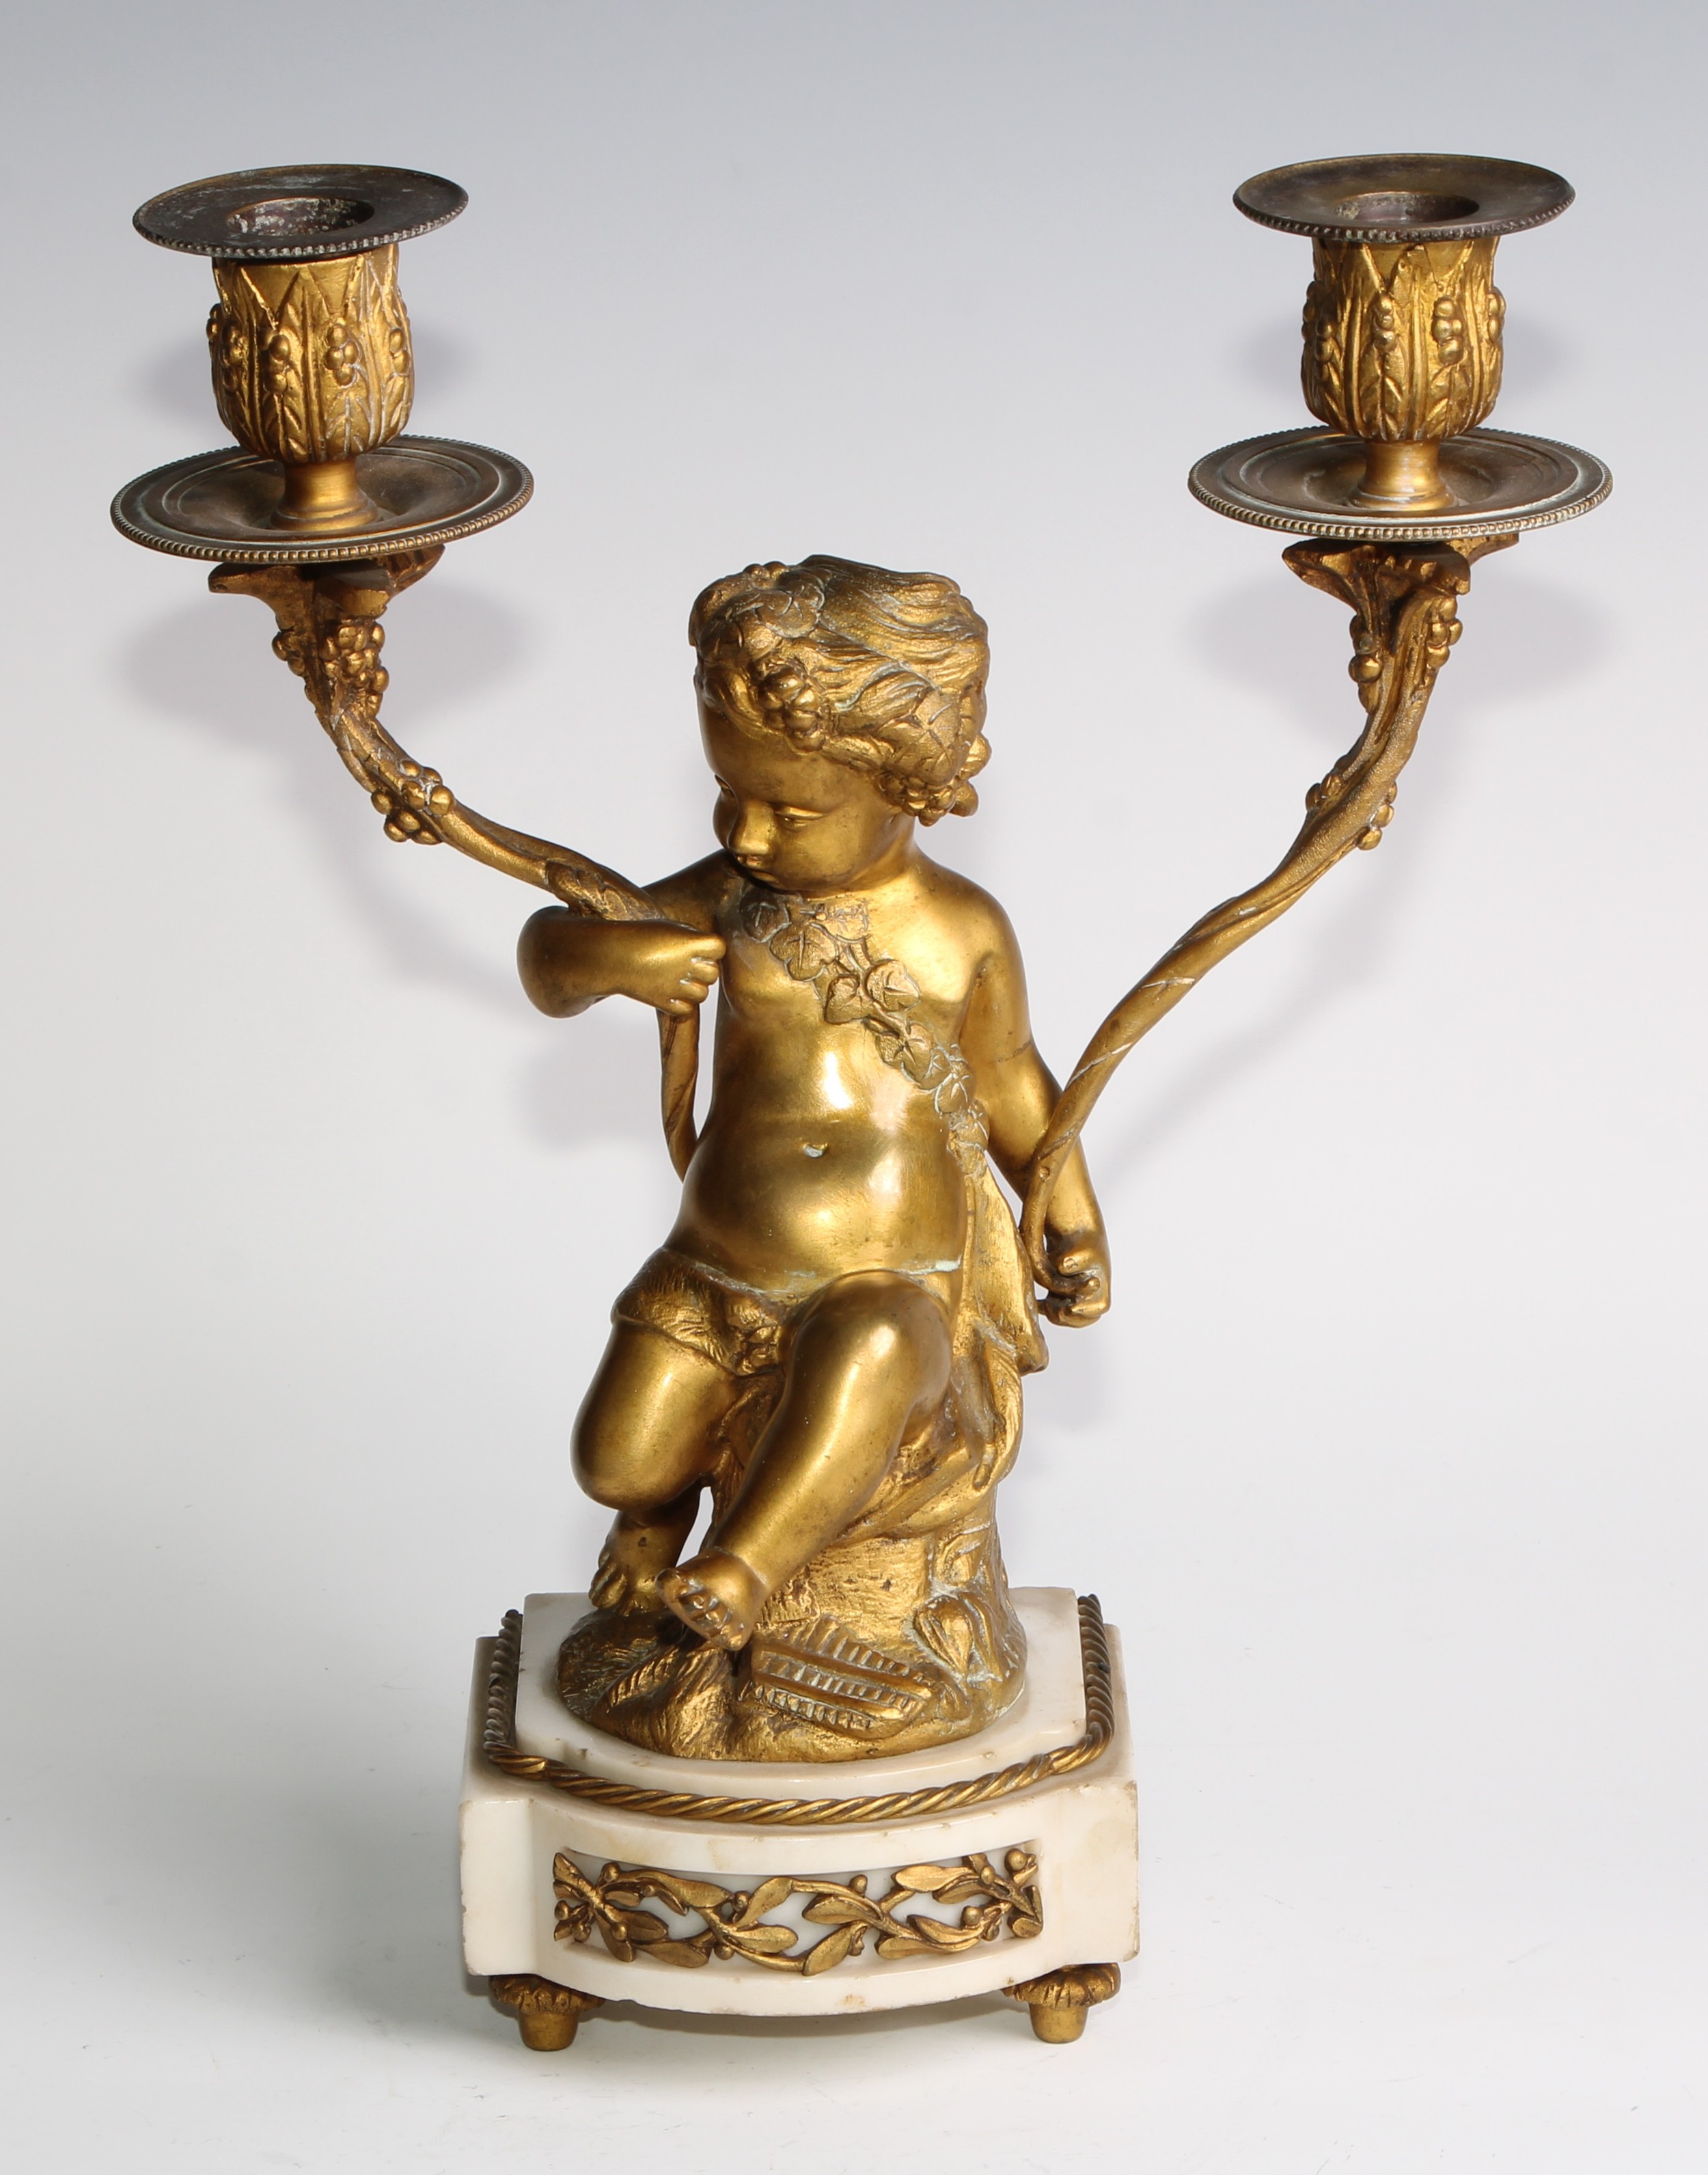 A pair of 19th century French bronze figural two-light candelabra, after Clodion (1738 - 1814), - Image 8 of 12